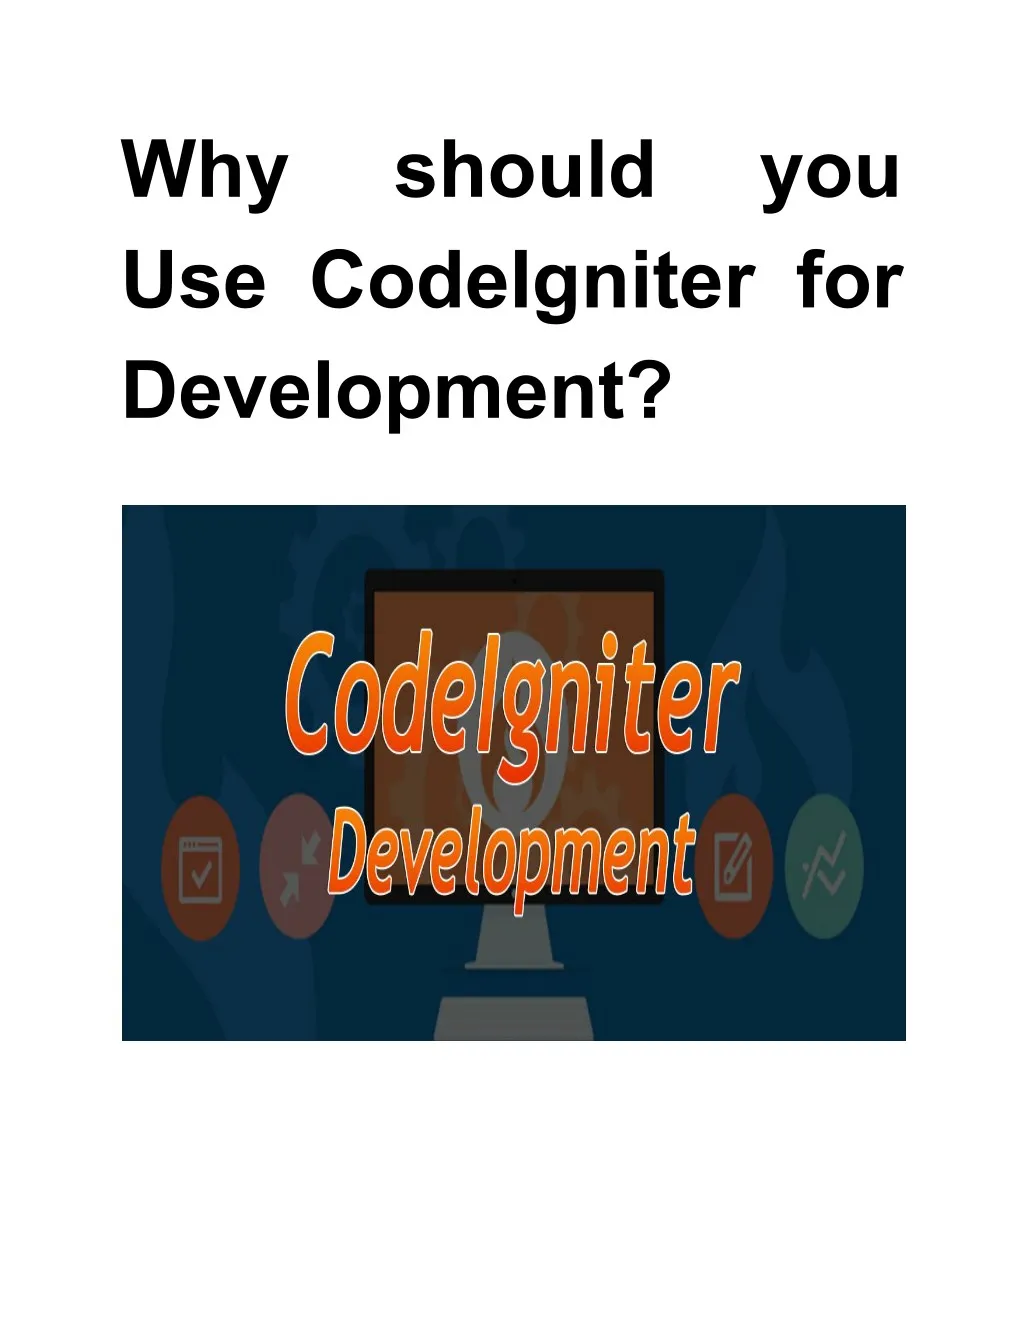 why use codeigniter for development